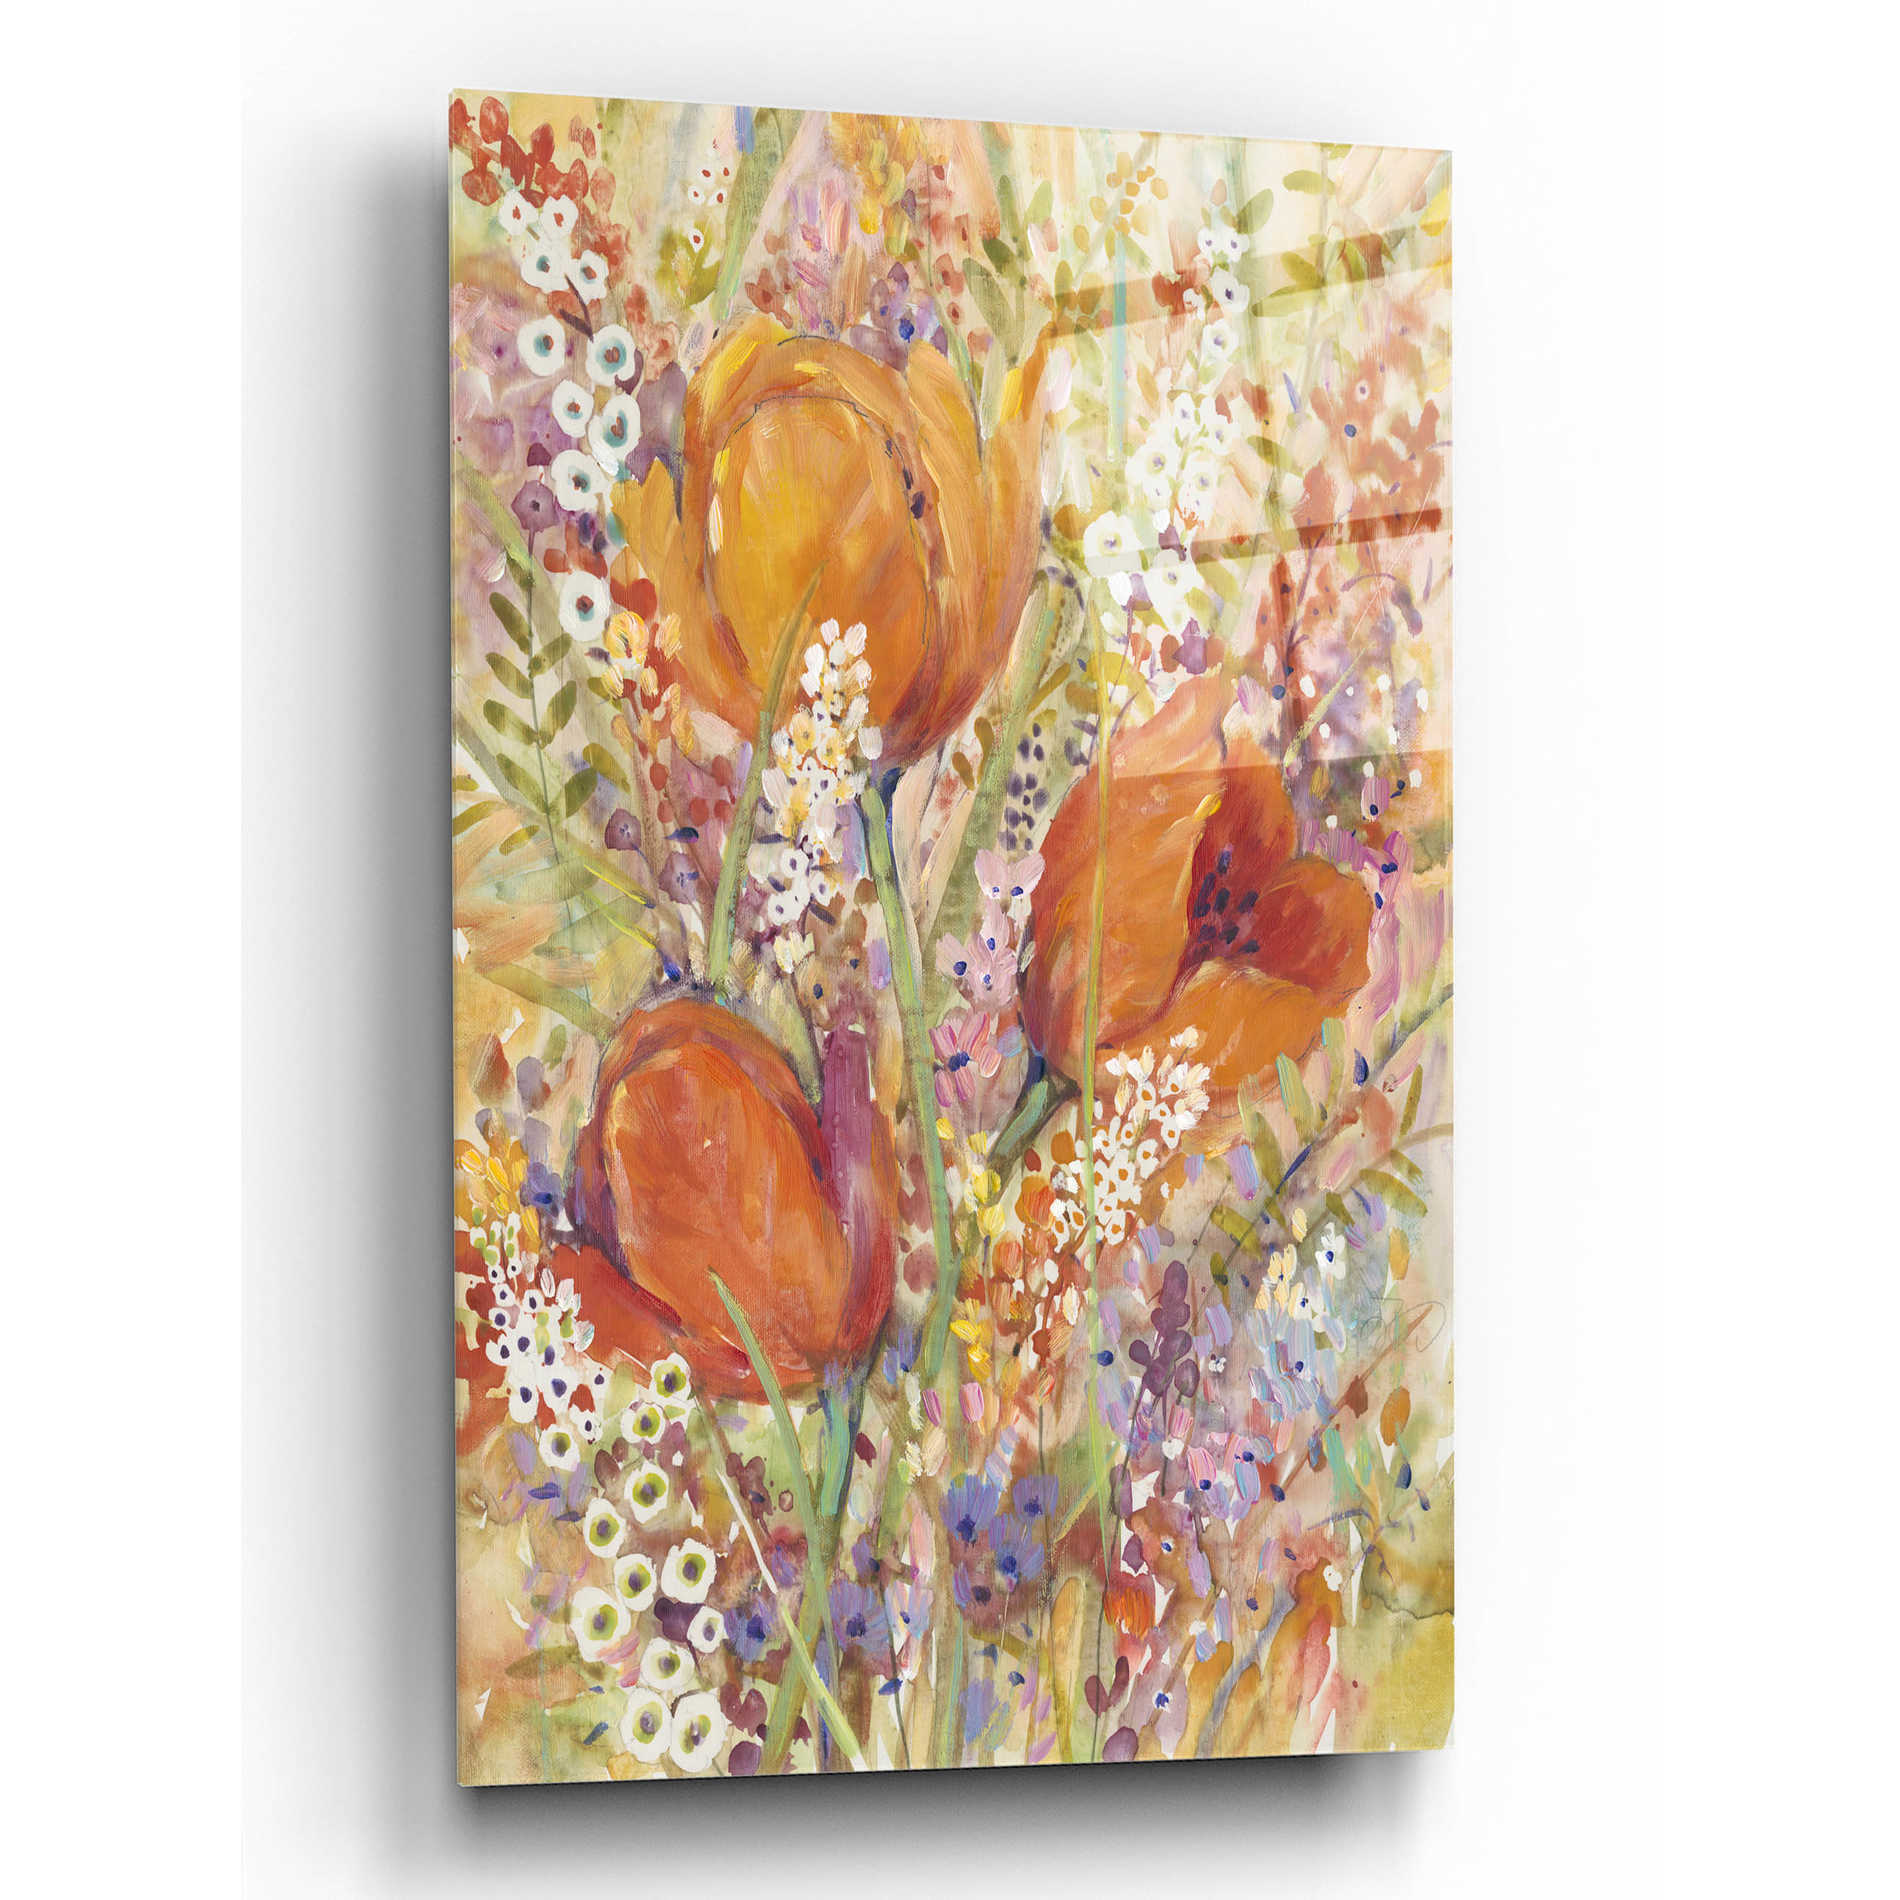 Epic Art 'Spring Bloom I' by Tim O'Toole, Acrylic Glass Wall Art,12x16